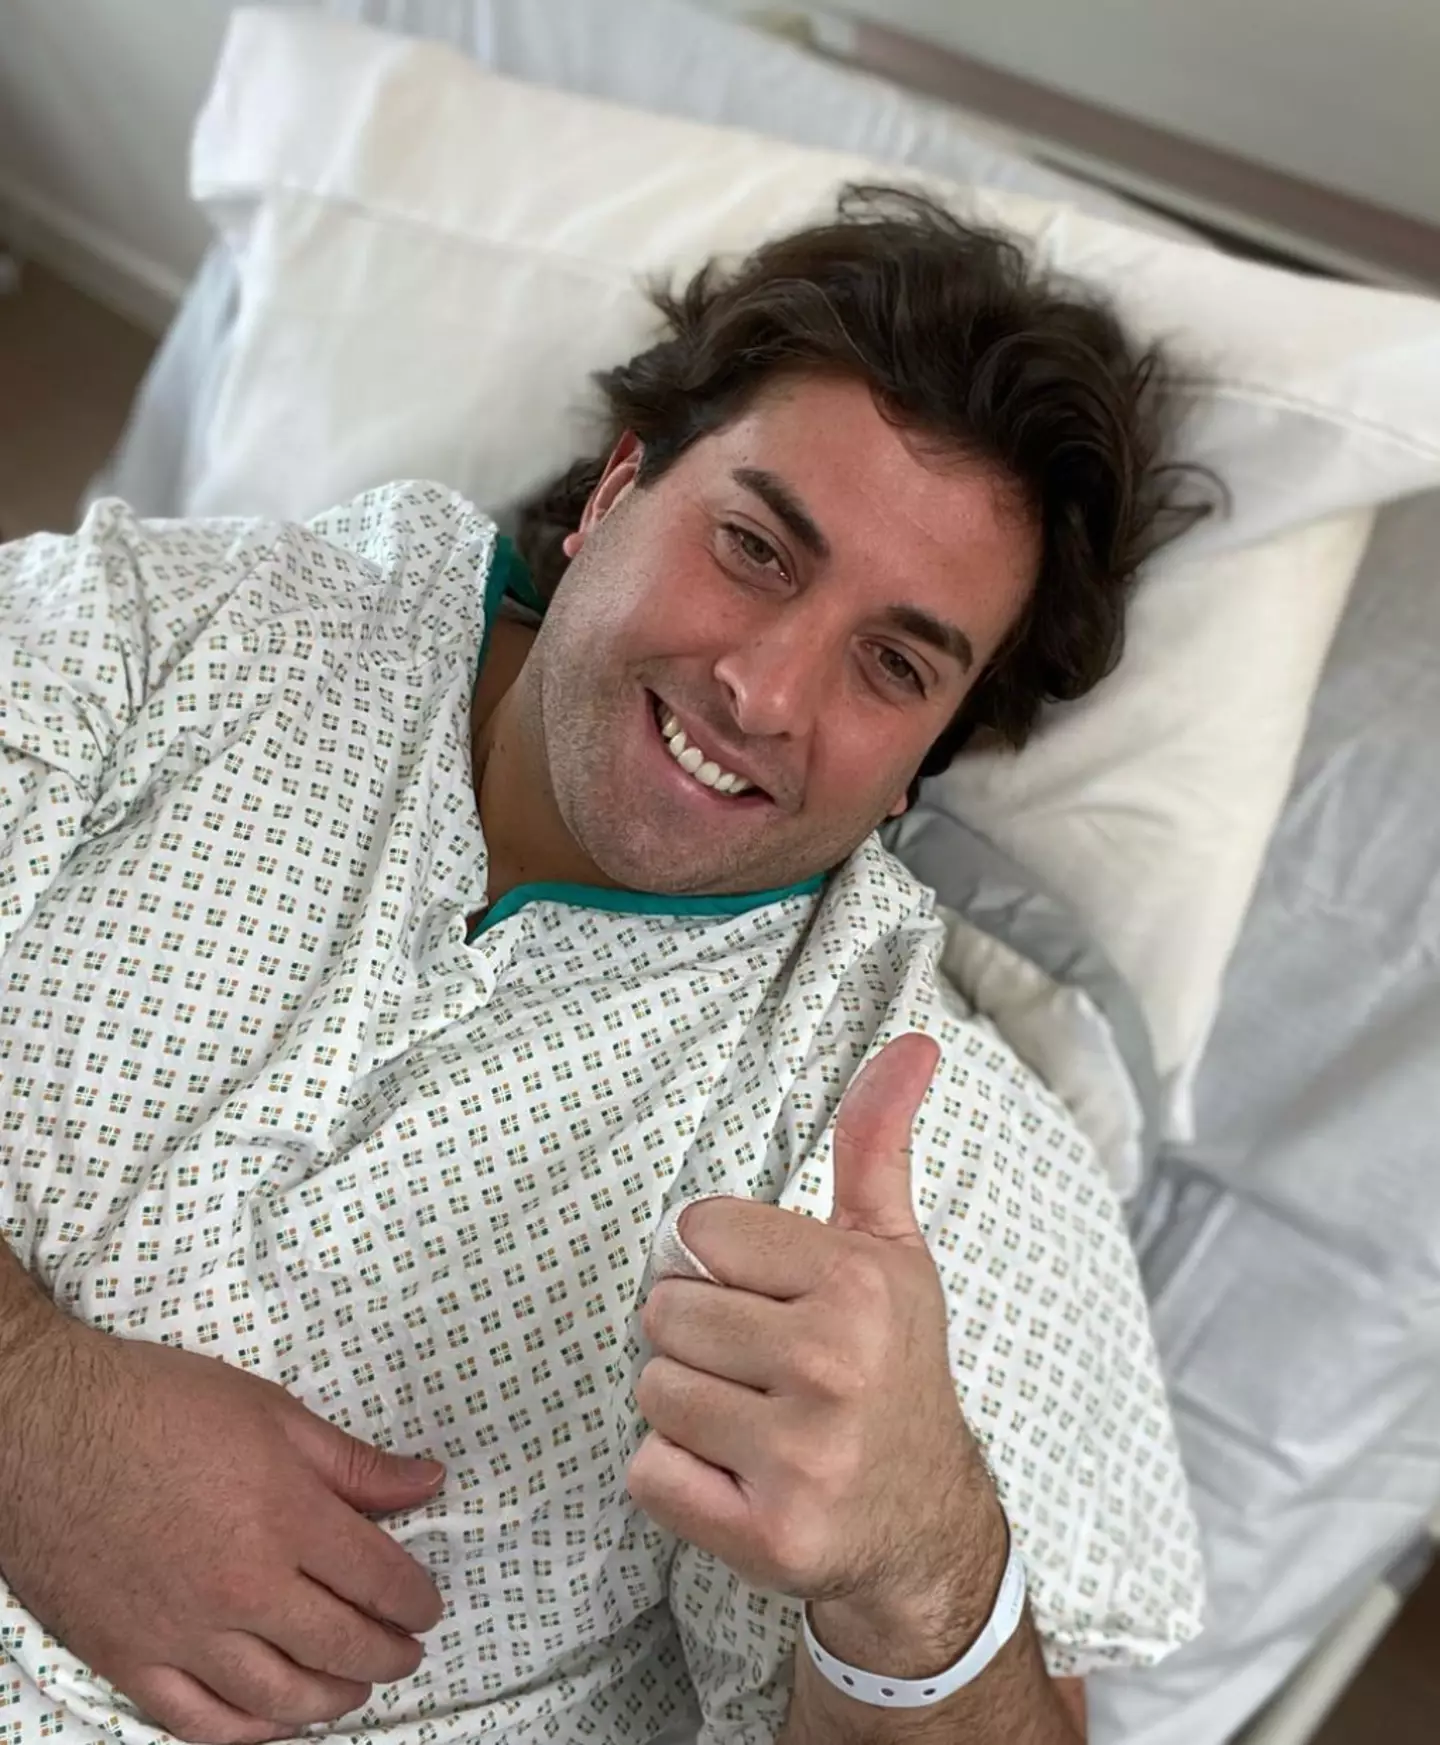 Arg posted on Instagram after coming out of surgery.